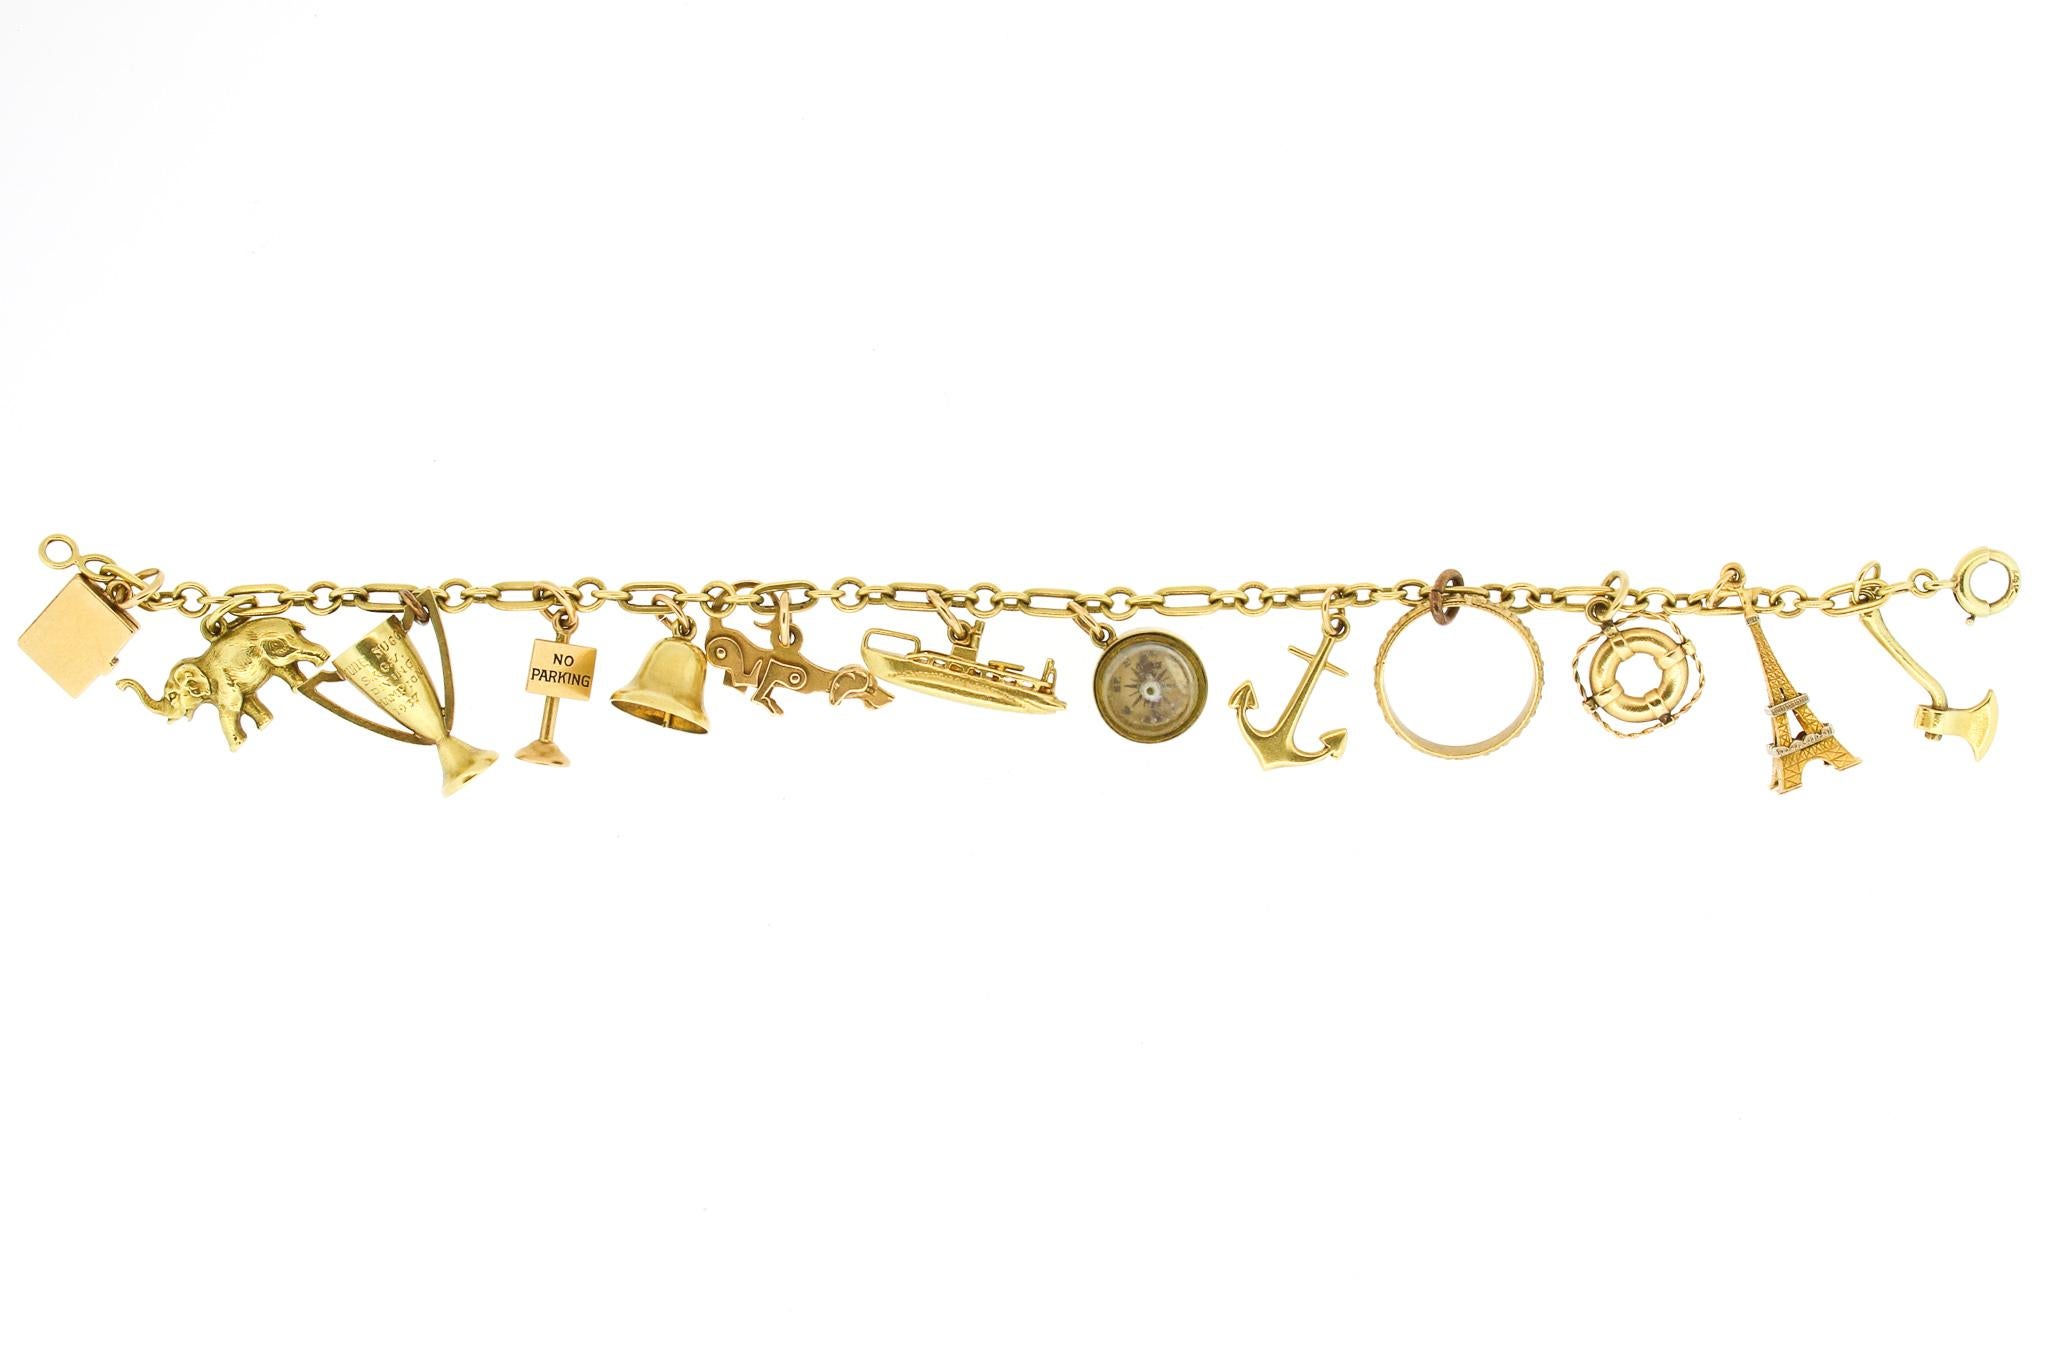 A fully finished 1940s vintage charm bracelet set with thirteen 14k yellow gold charms. The charms are all articulated and beautifully rendered. The charms are: A case that opens (now empty), an elephant, a trophy dated 1937, a No Parking sign, a